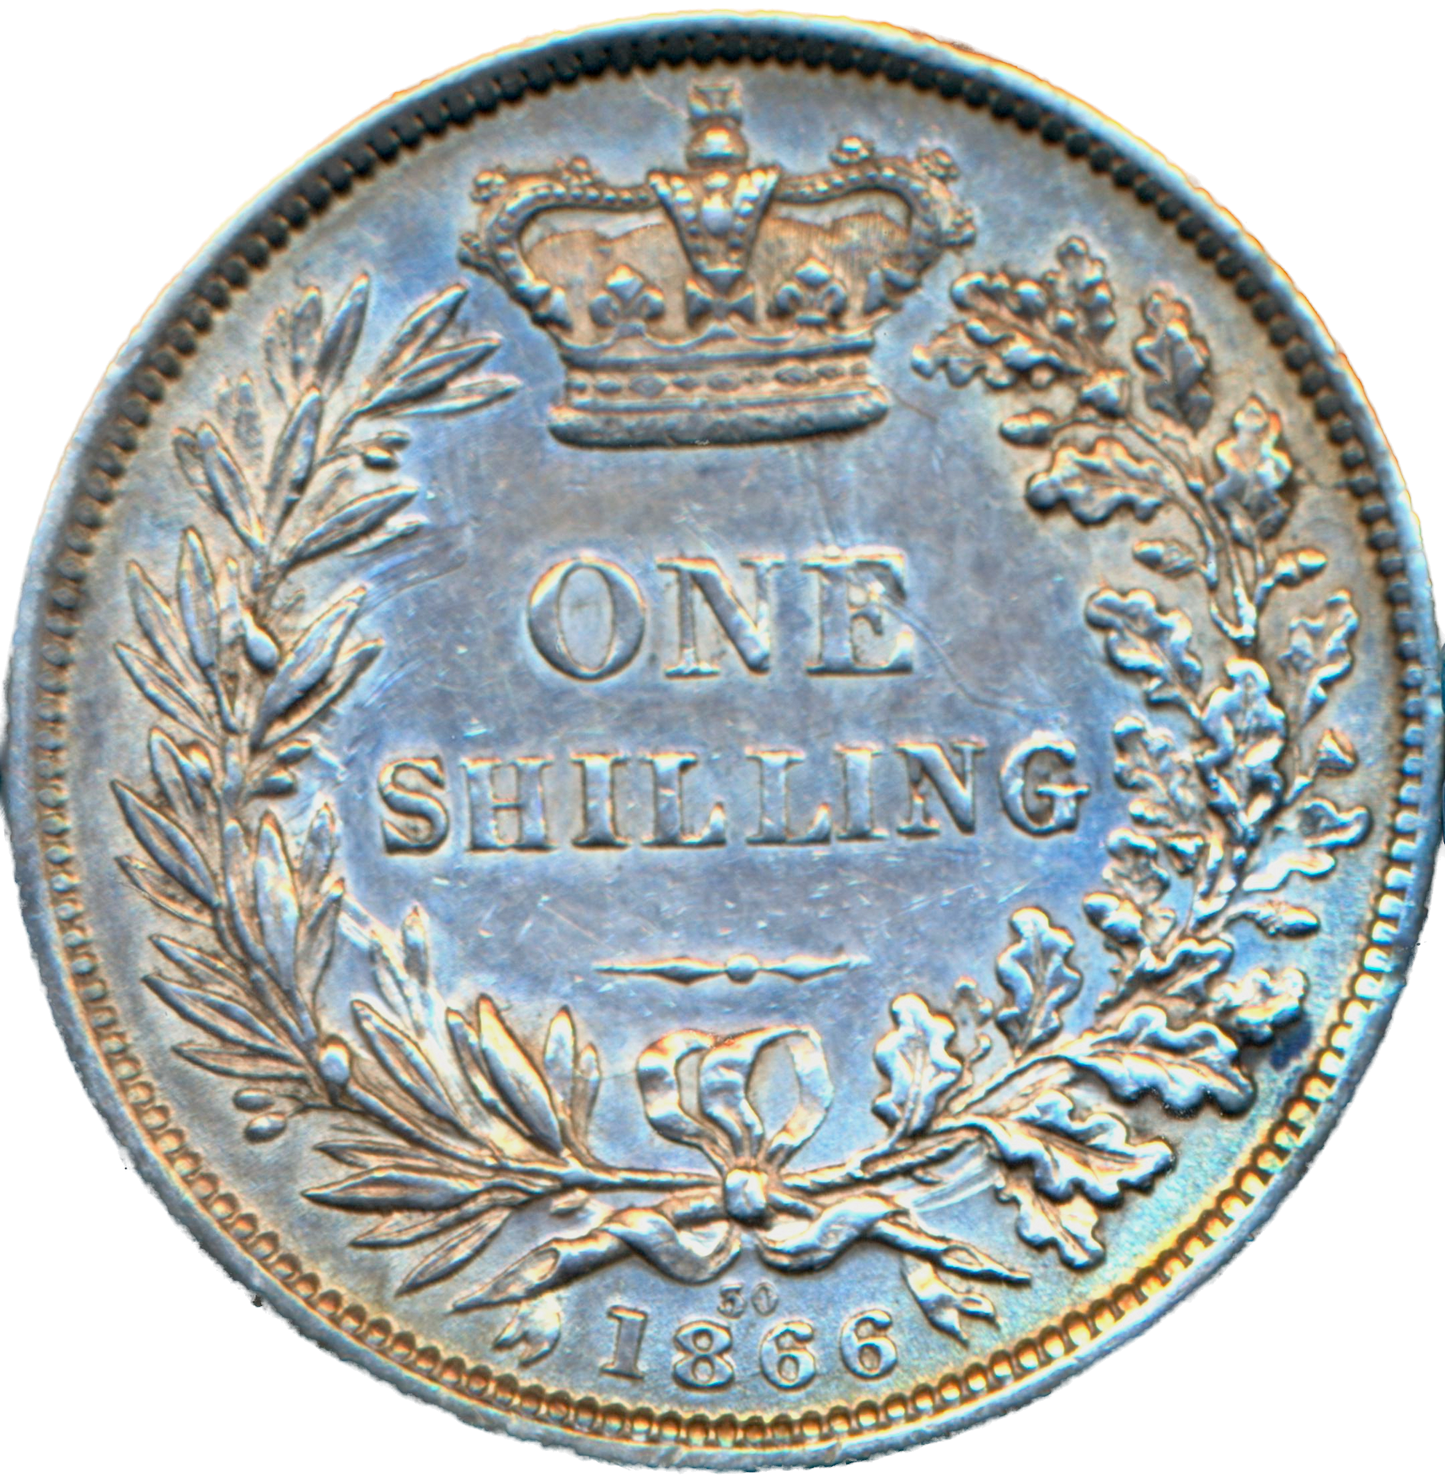 1866 Shilling Second young head die 30 S3905 ESC 3027 NEF